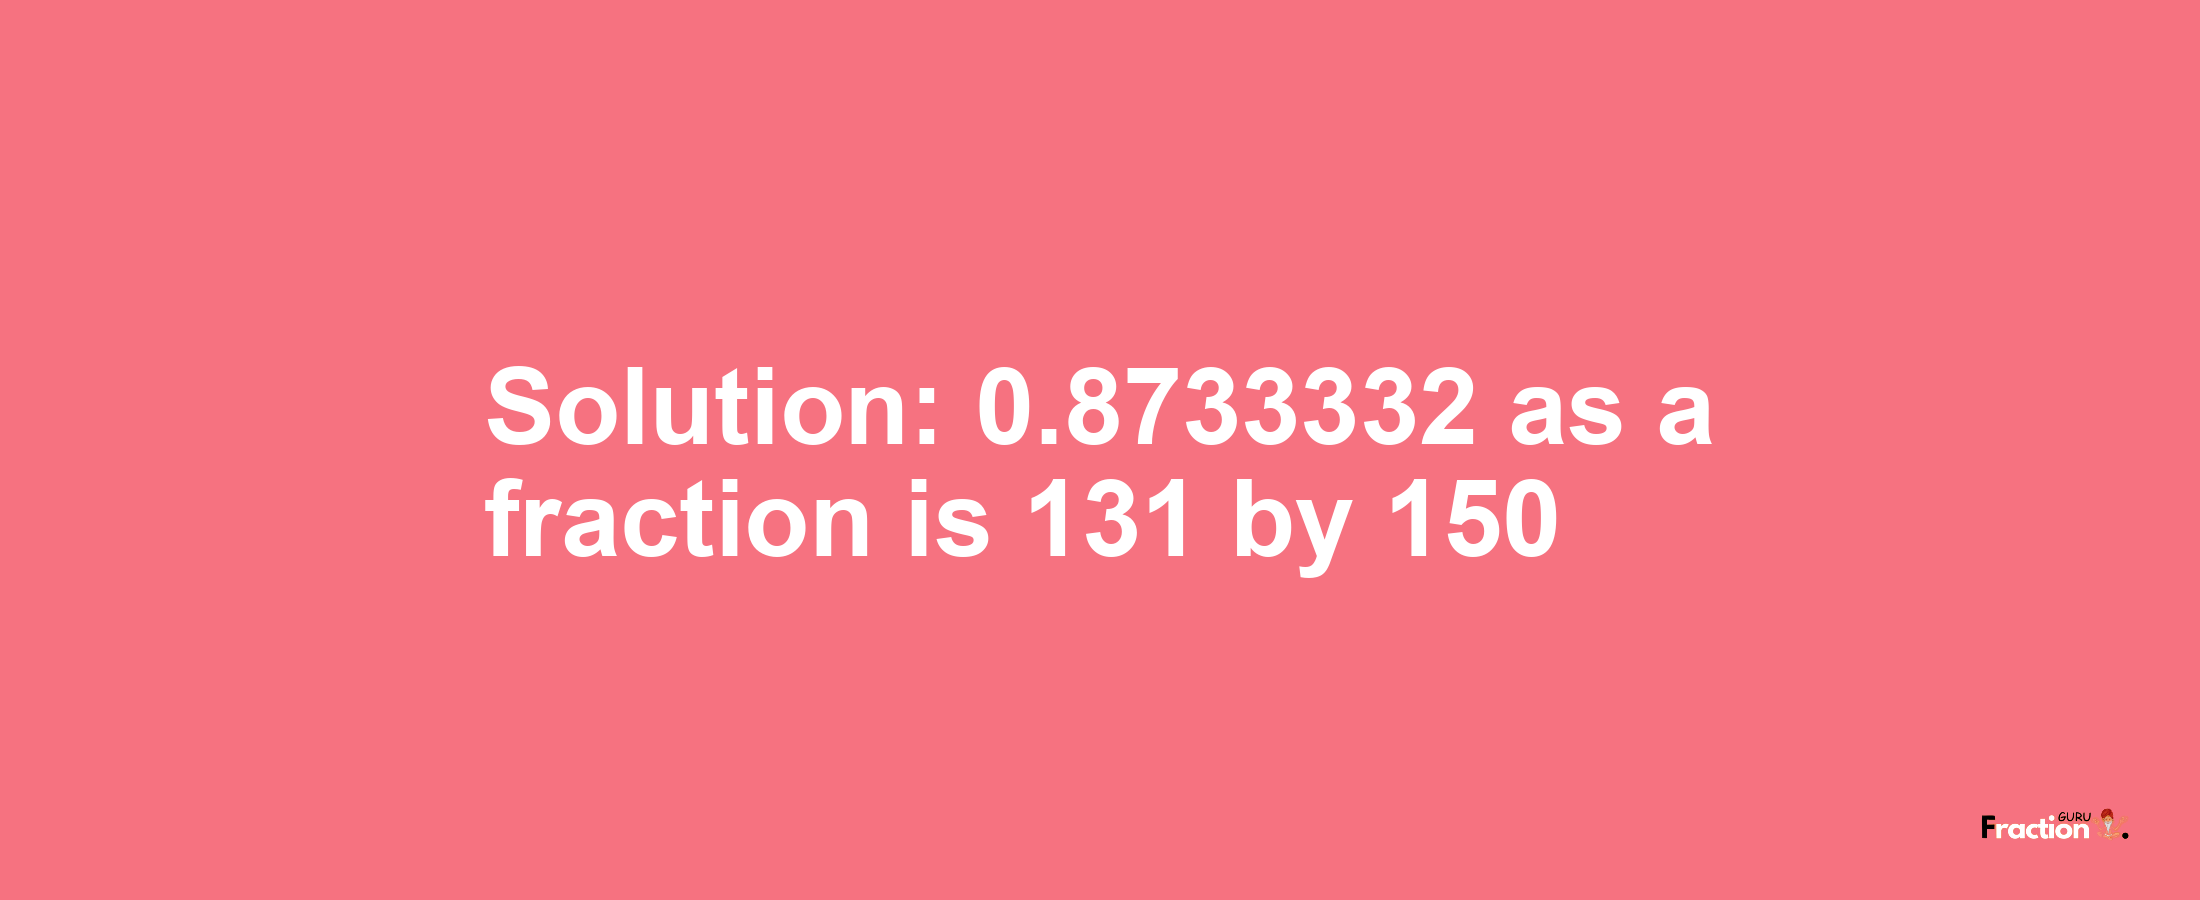 Solution:0.8733332 as a fraction is 131/150